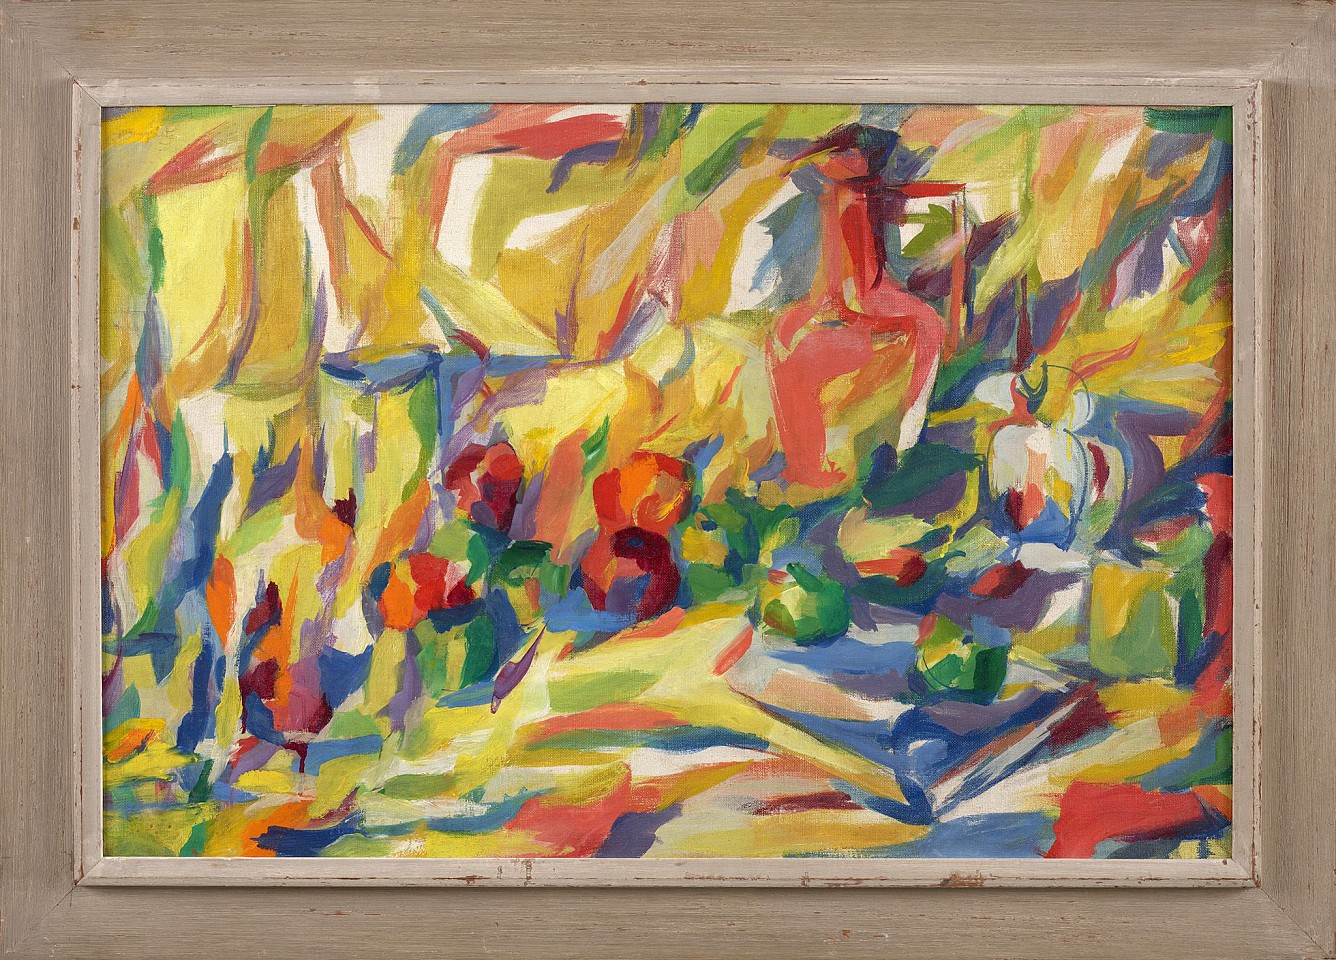 Pearl Angrist, Flaming Fruits, c. 1950-58
Oil on canvas, 24 x 36 in. (61 x 91.4 cm)
ANG-00004